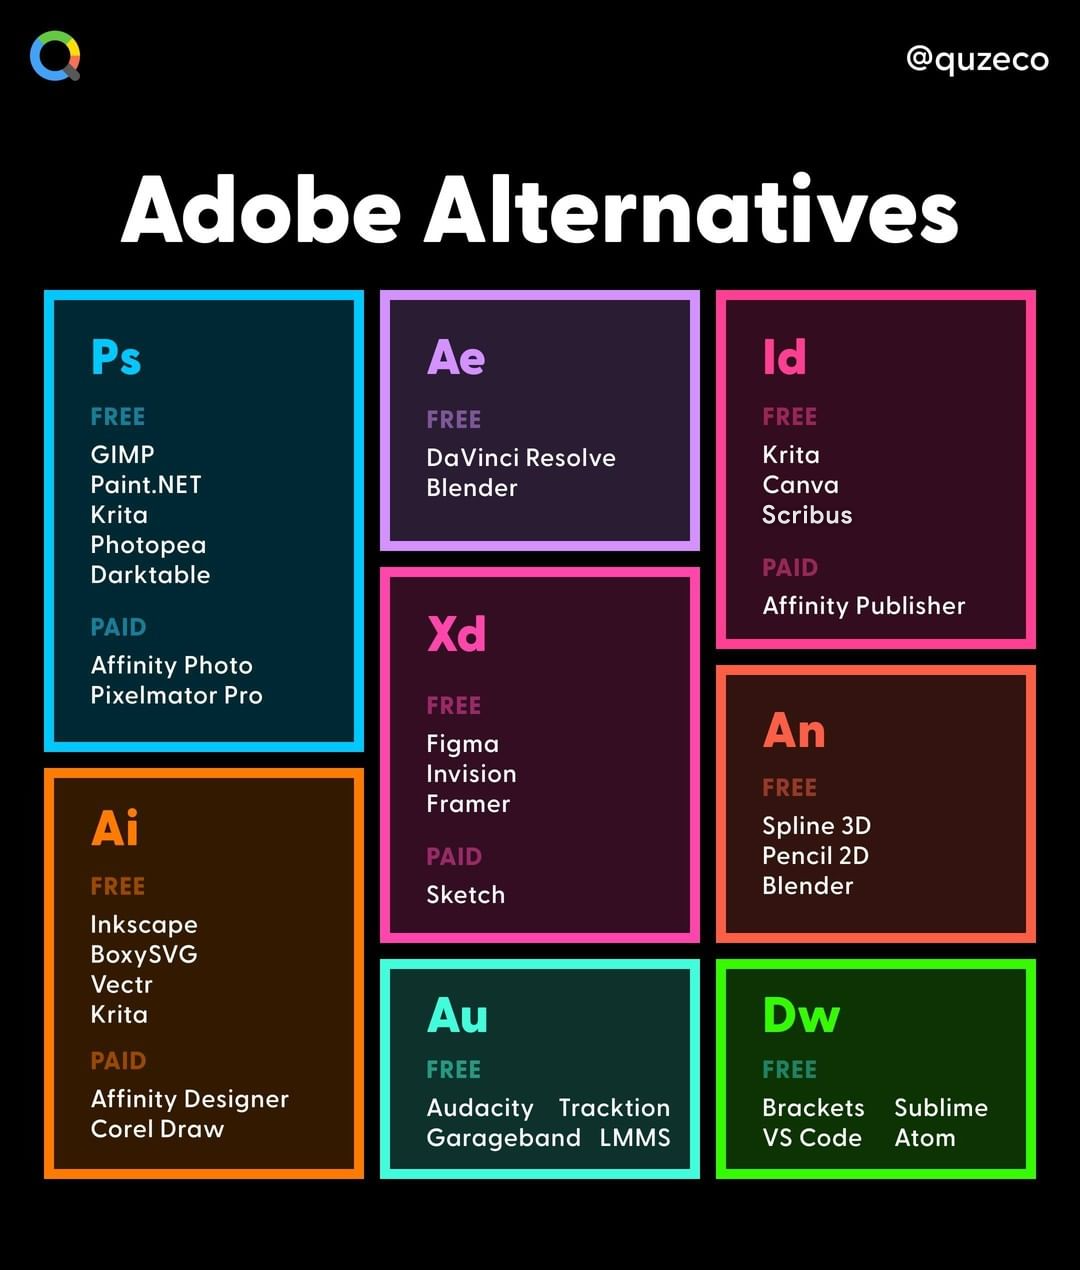 Free And Cheaper Alternatives To Photoshop, Illustrator, And Other Adobe  Creative Software